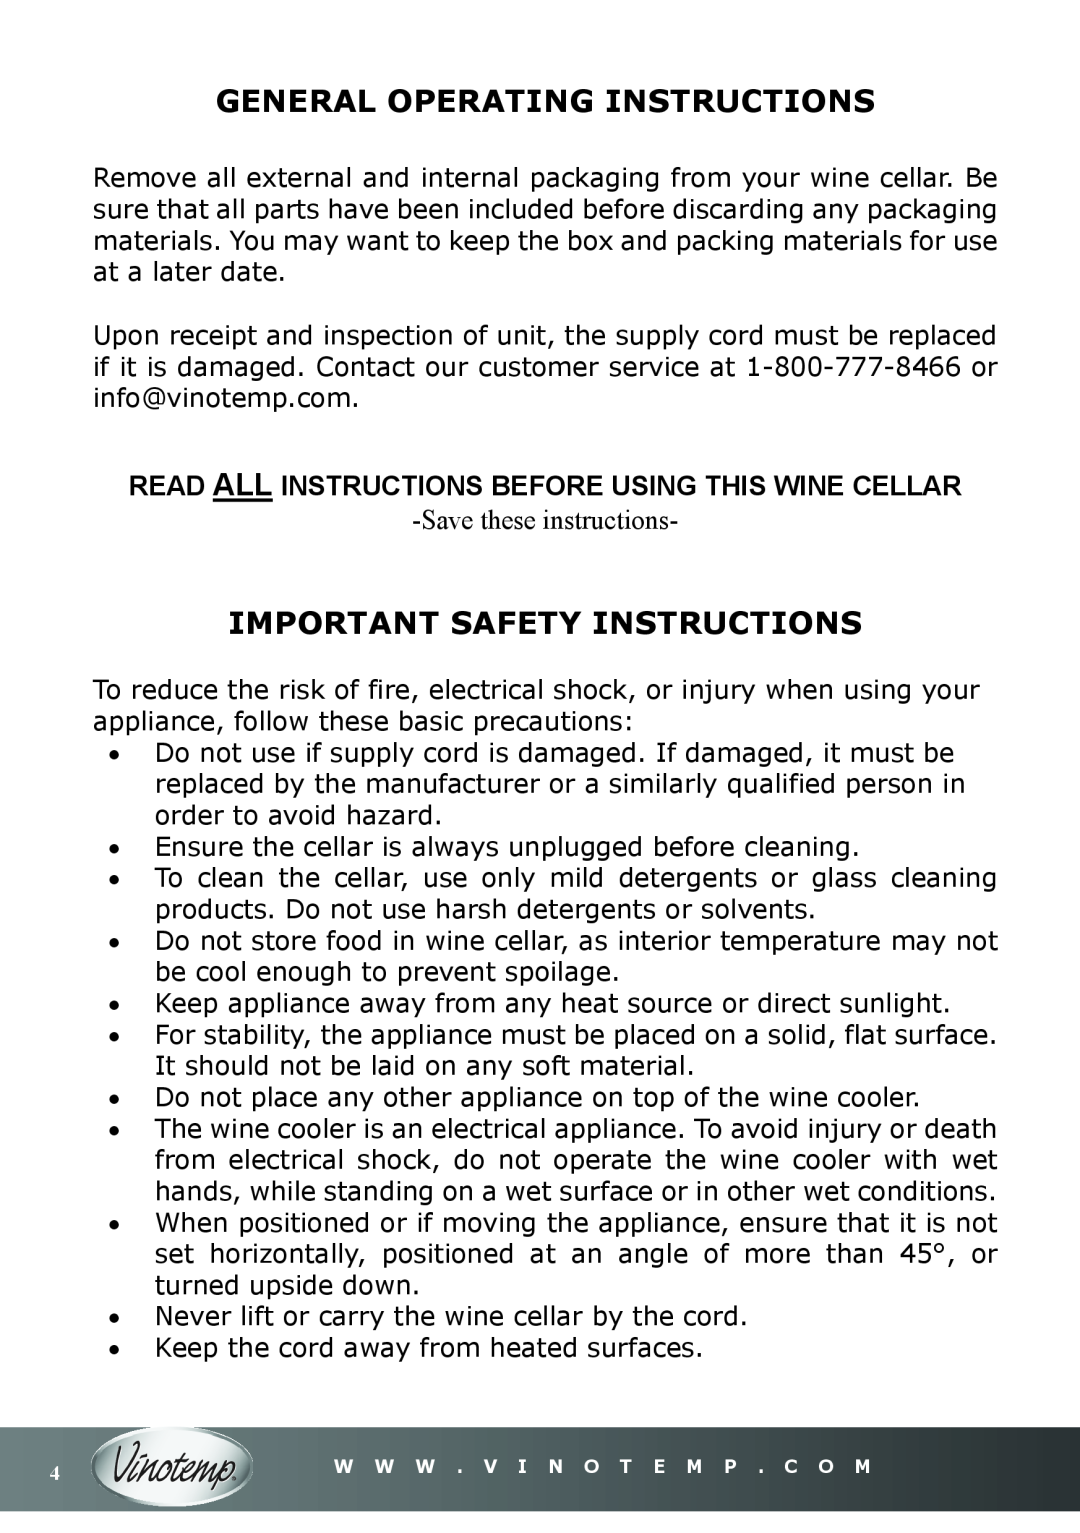 Vinotemp VT-16TEDS owner manual General Operating Instructions, Important Safety Instructions, Savethese instructions 